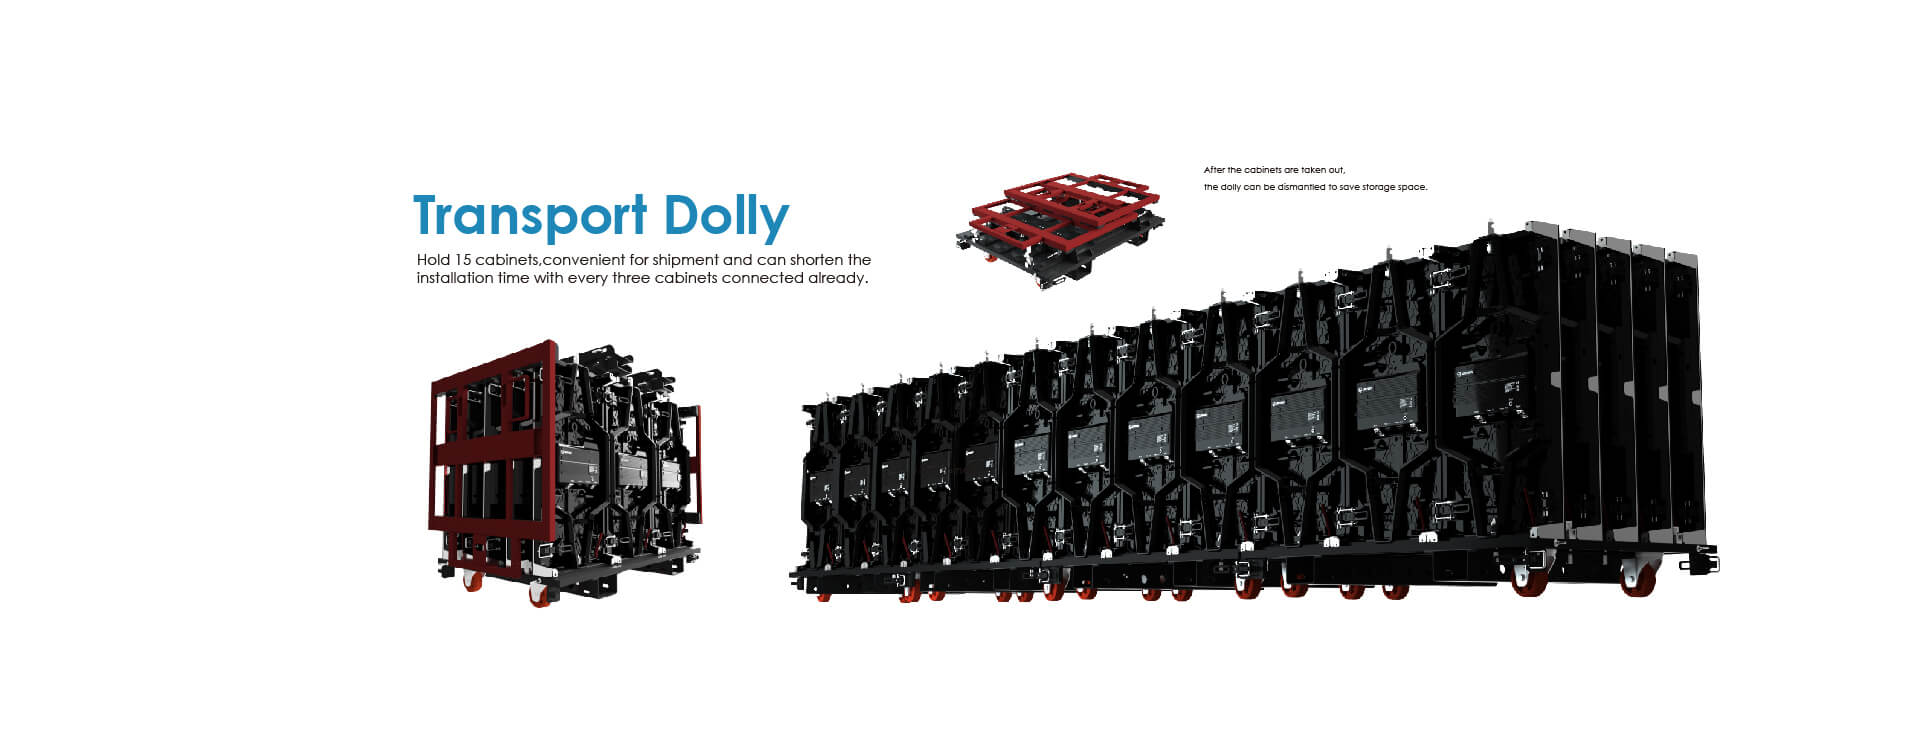 transport dolly, led display